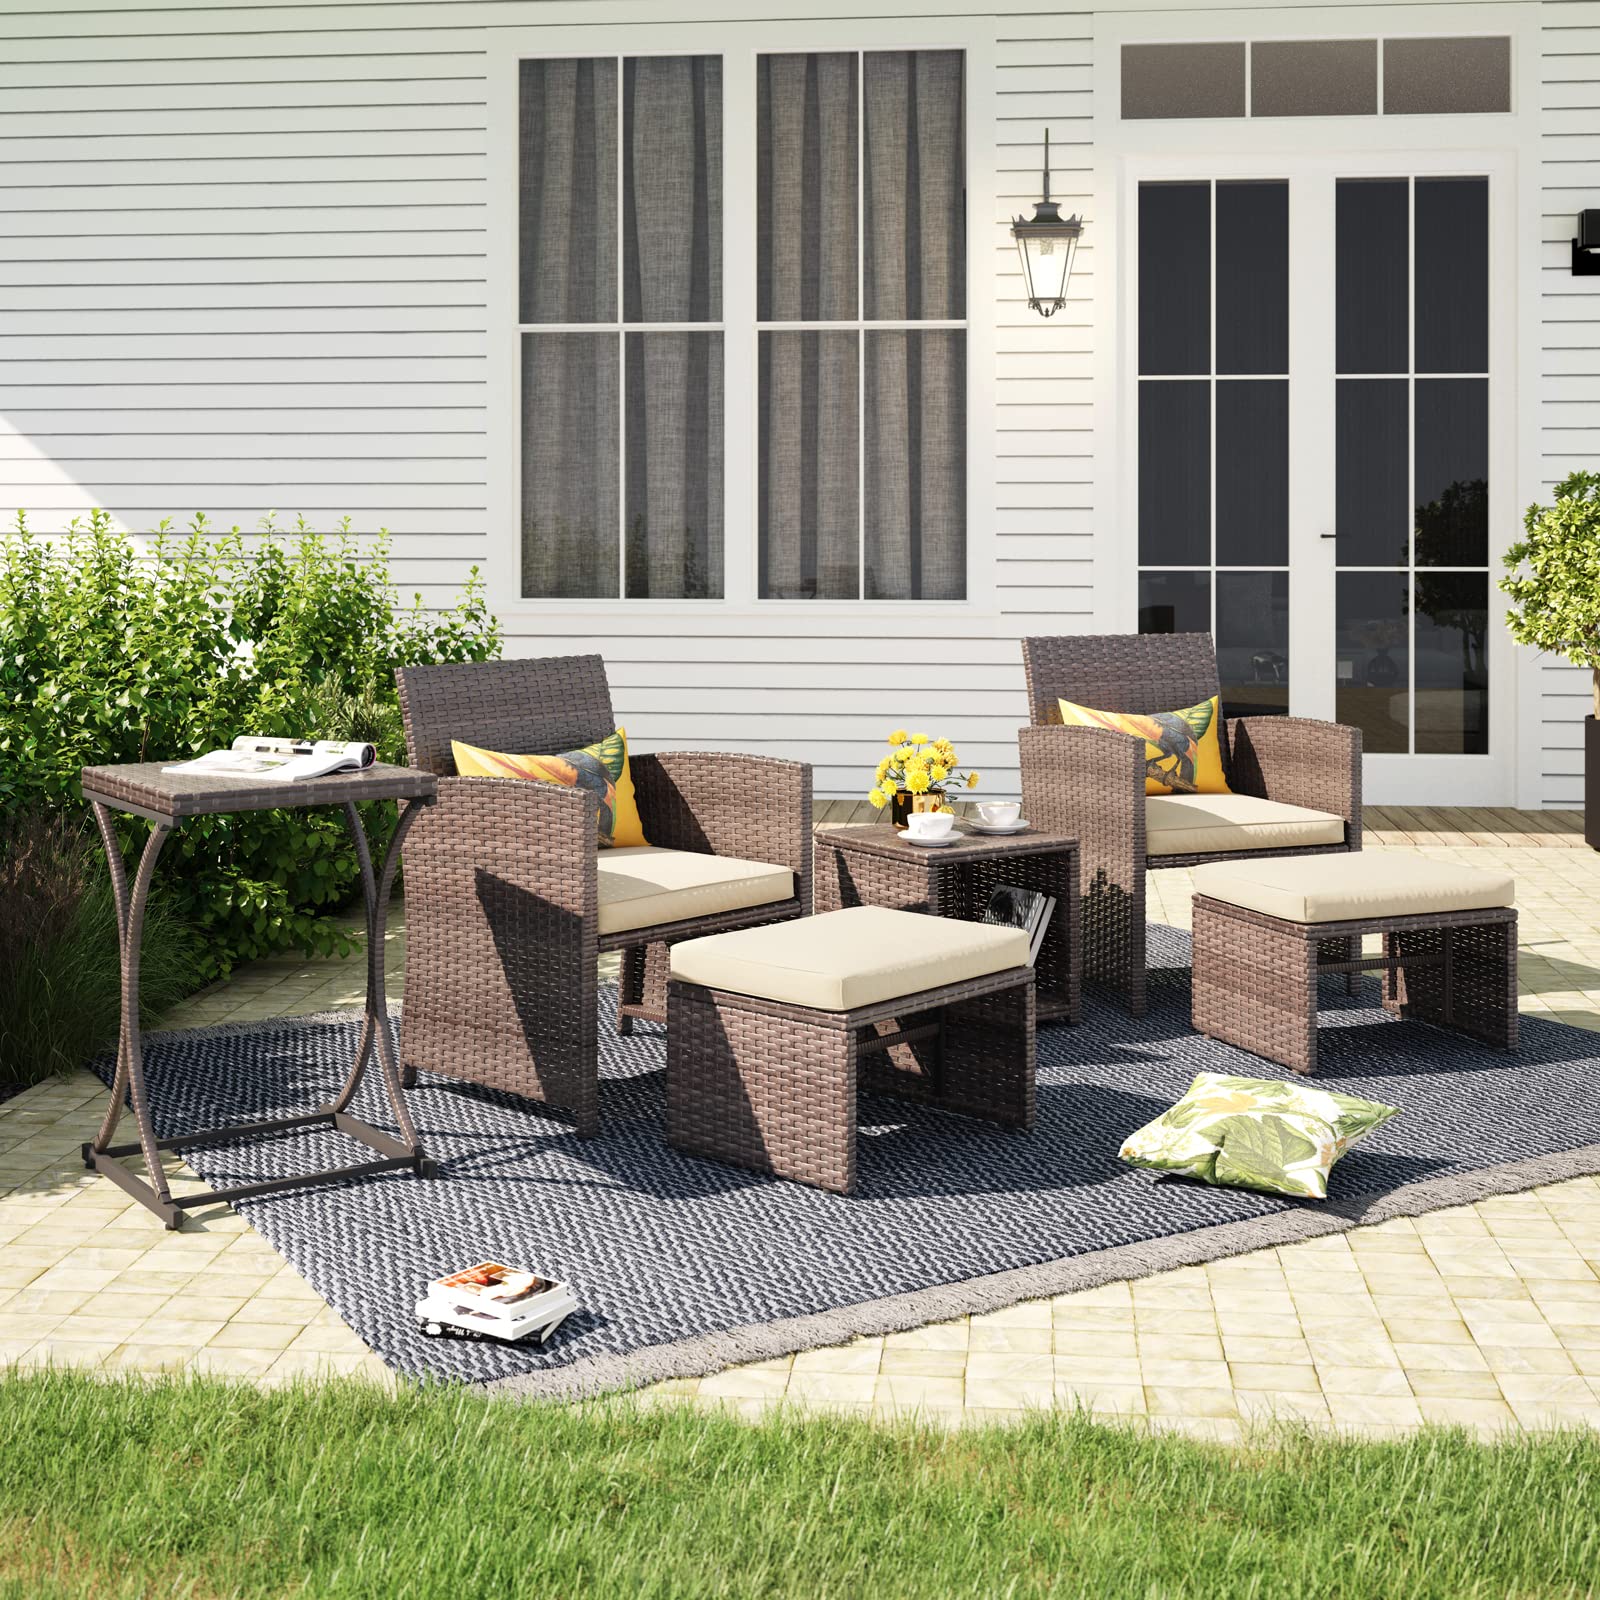 6pcs Brown Wicker Outdoor Conversation Set, Patio Chairs with Ottomans & 2 Side Tables,3 Cushion colors